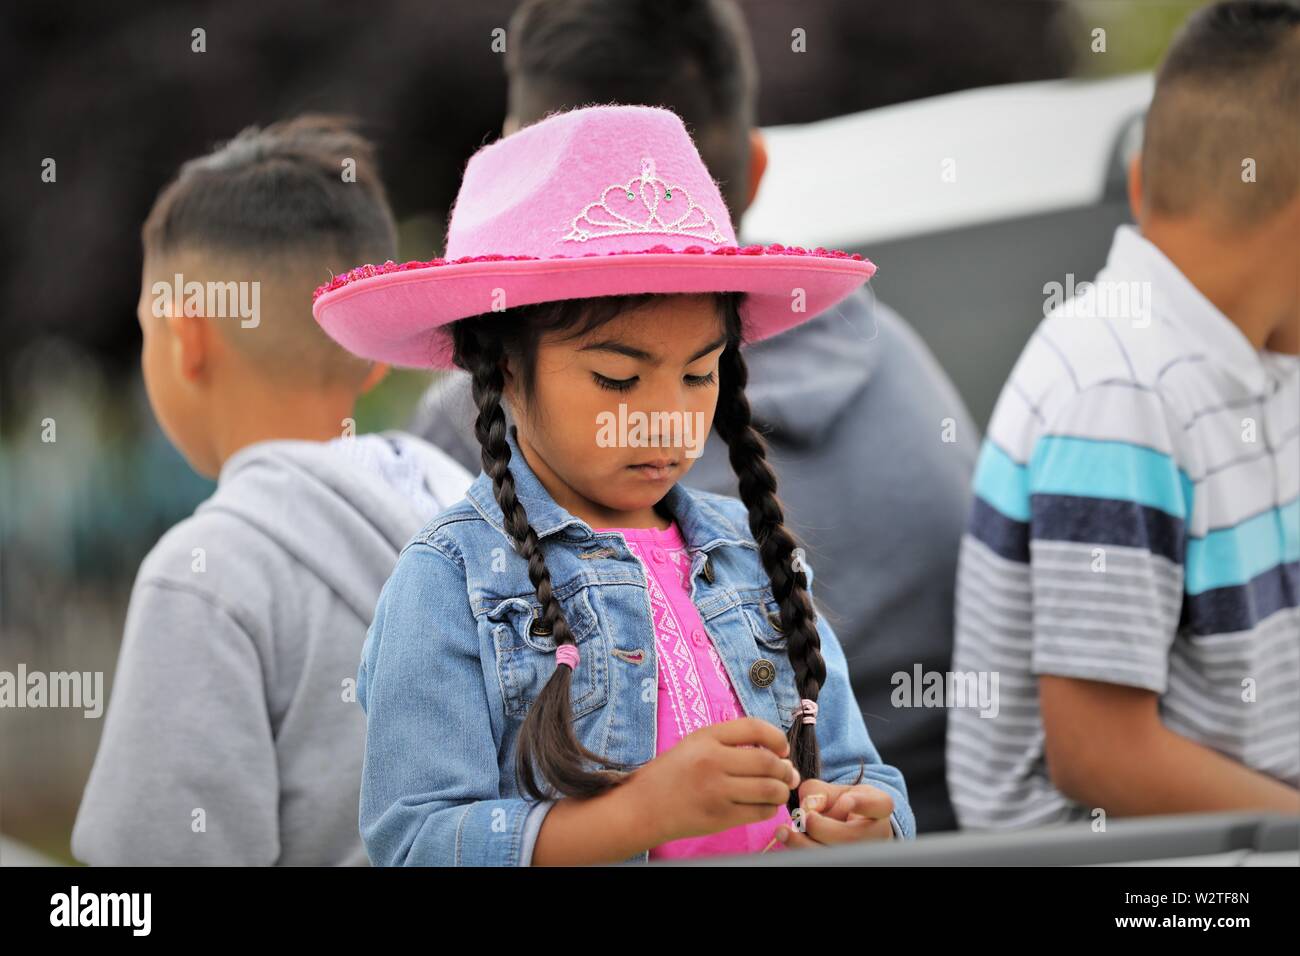 Kids at public parade celebrating their Mexican heritage ranching and cowboy and cowgirl heritage in California with pink hat Stock Photo